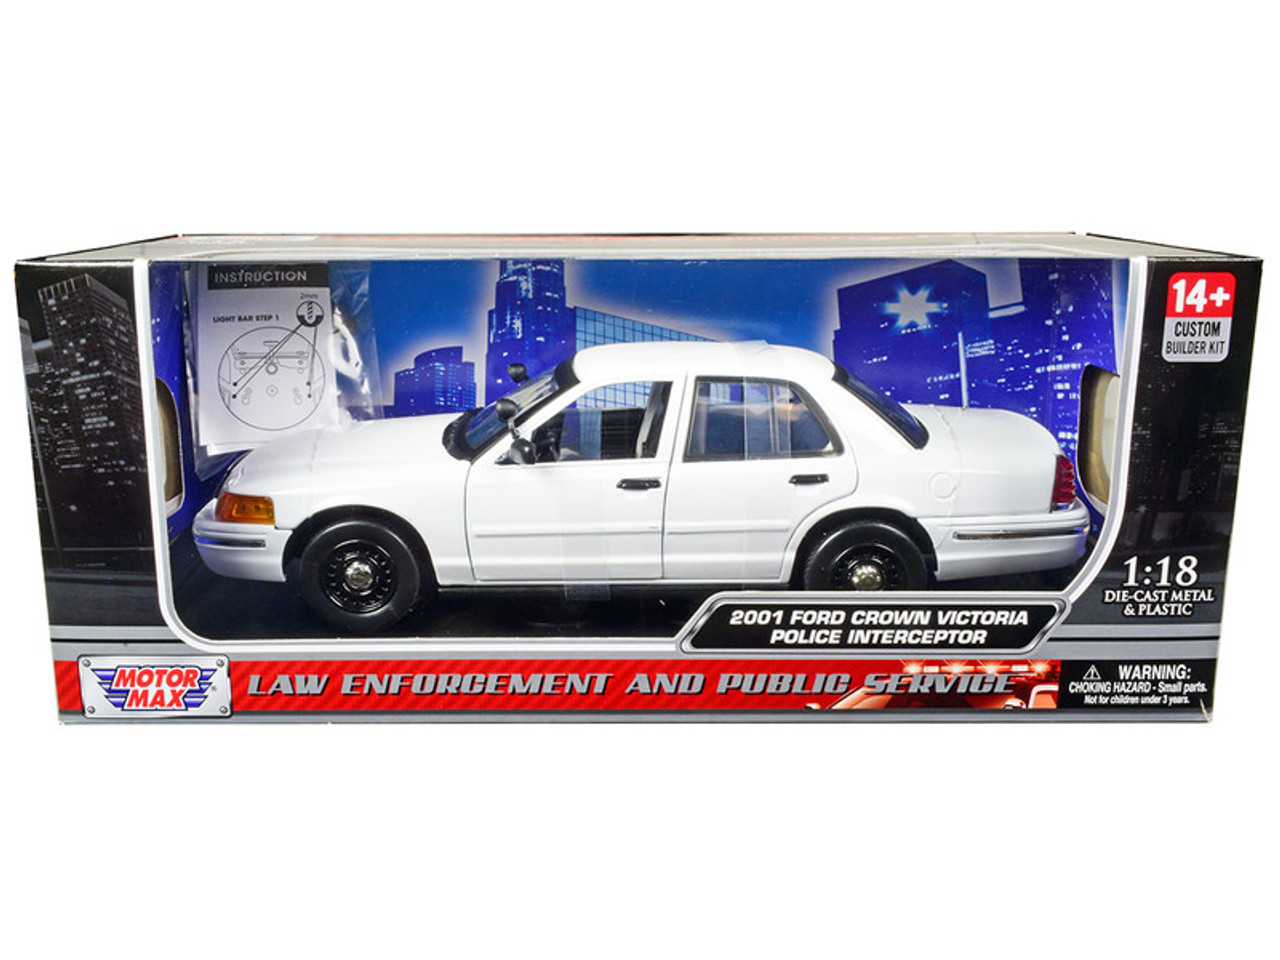 2001 Ford Crown Victoria Police Car Unmarked White "Custom Builder's Kit" Series 1/18 Diecast Model Car by Motormax